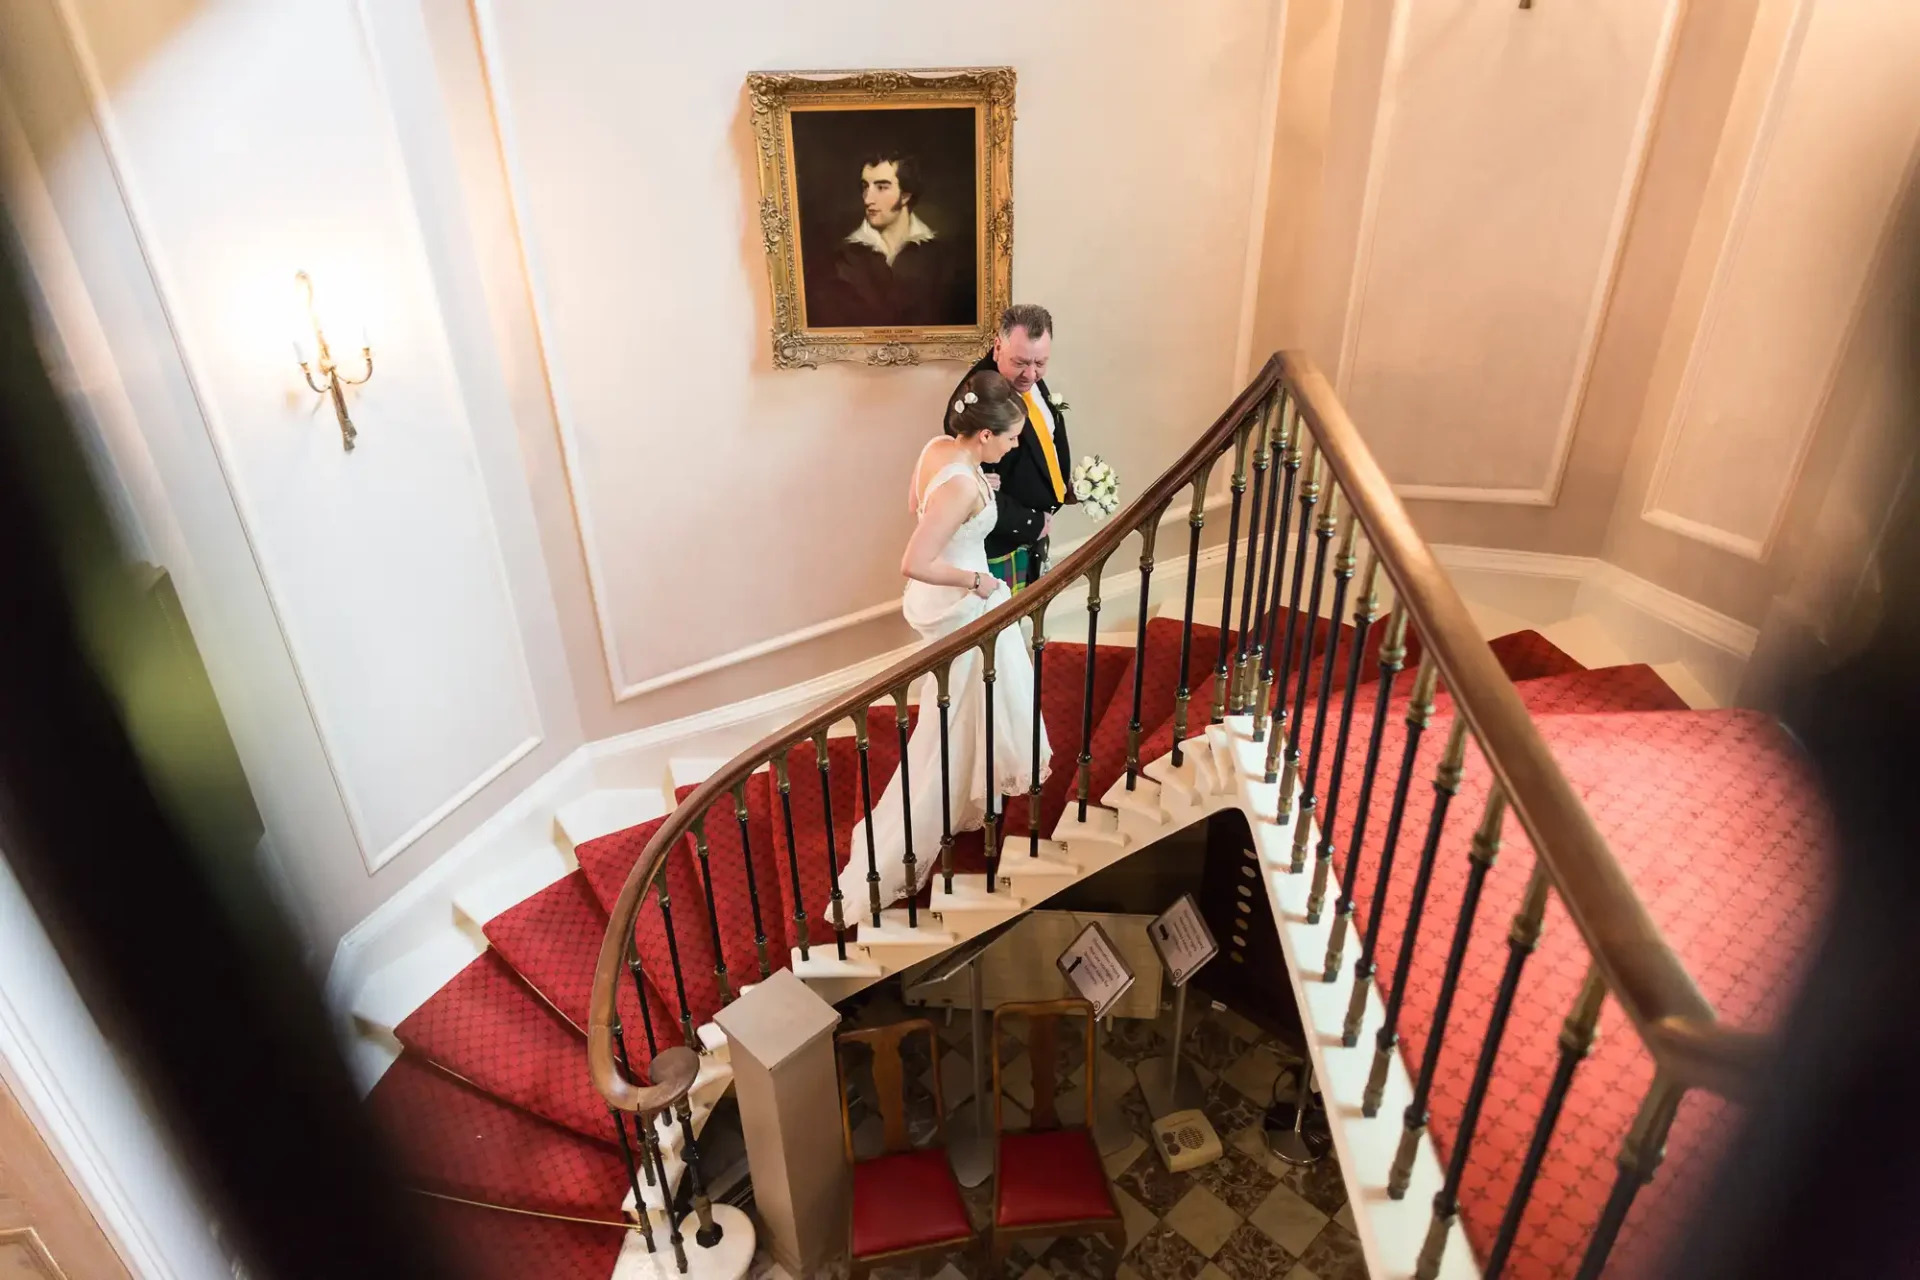 A bride and groom descend a curved staircase in an elegant hallway, with a portrait hanging on the wall above them.